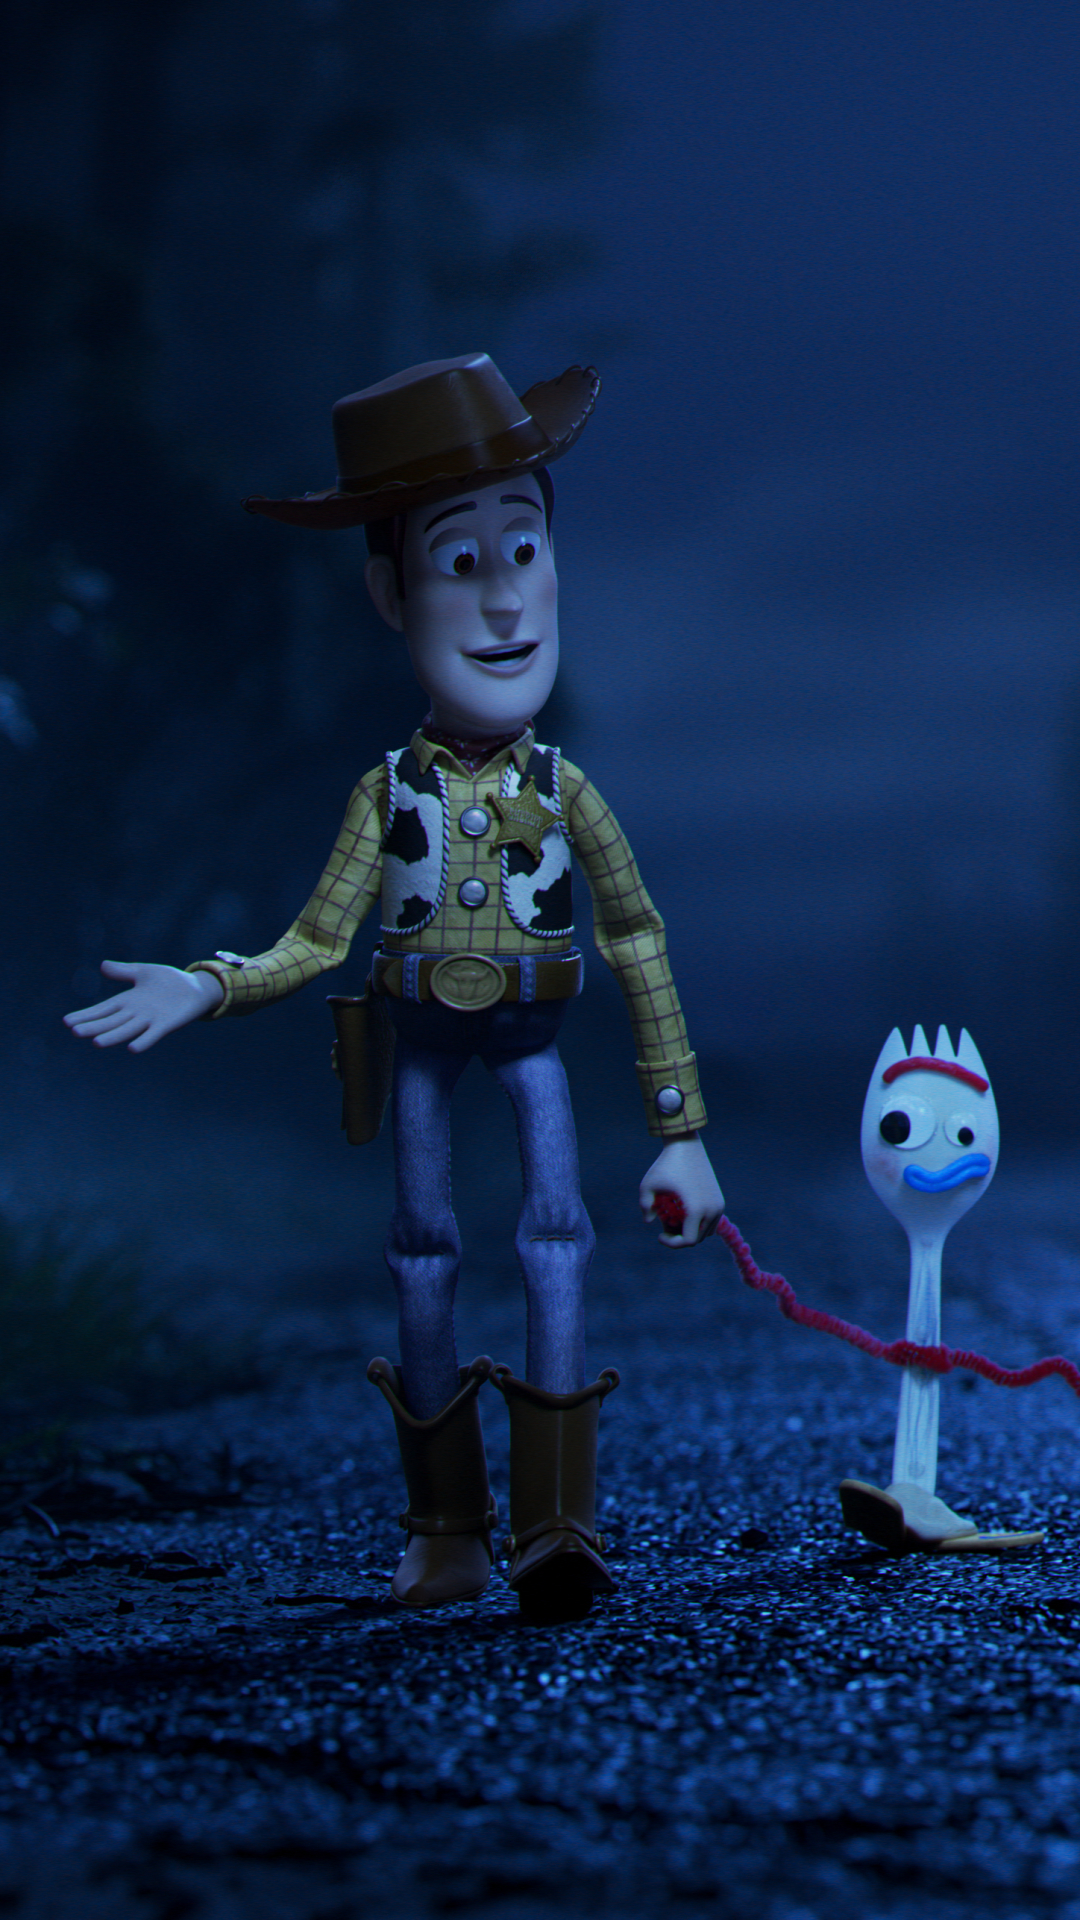 woody (toy story), movie, toy story 4, forky (toy story)